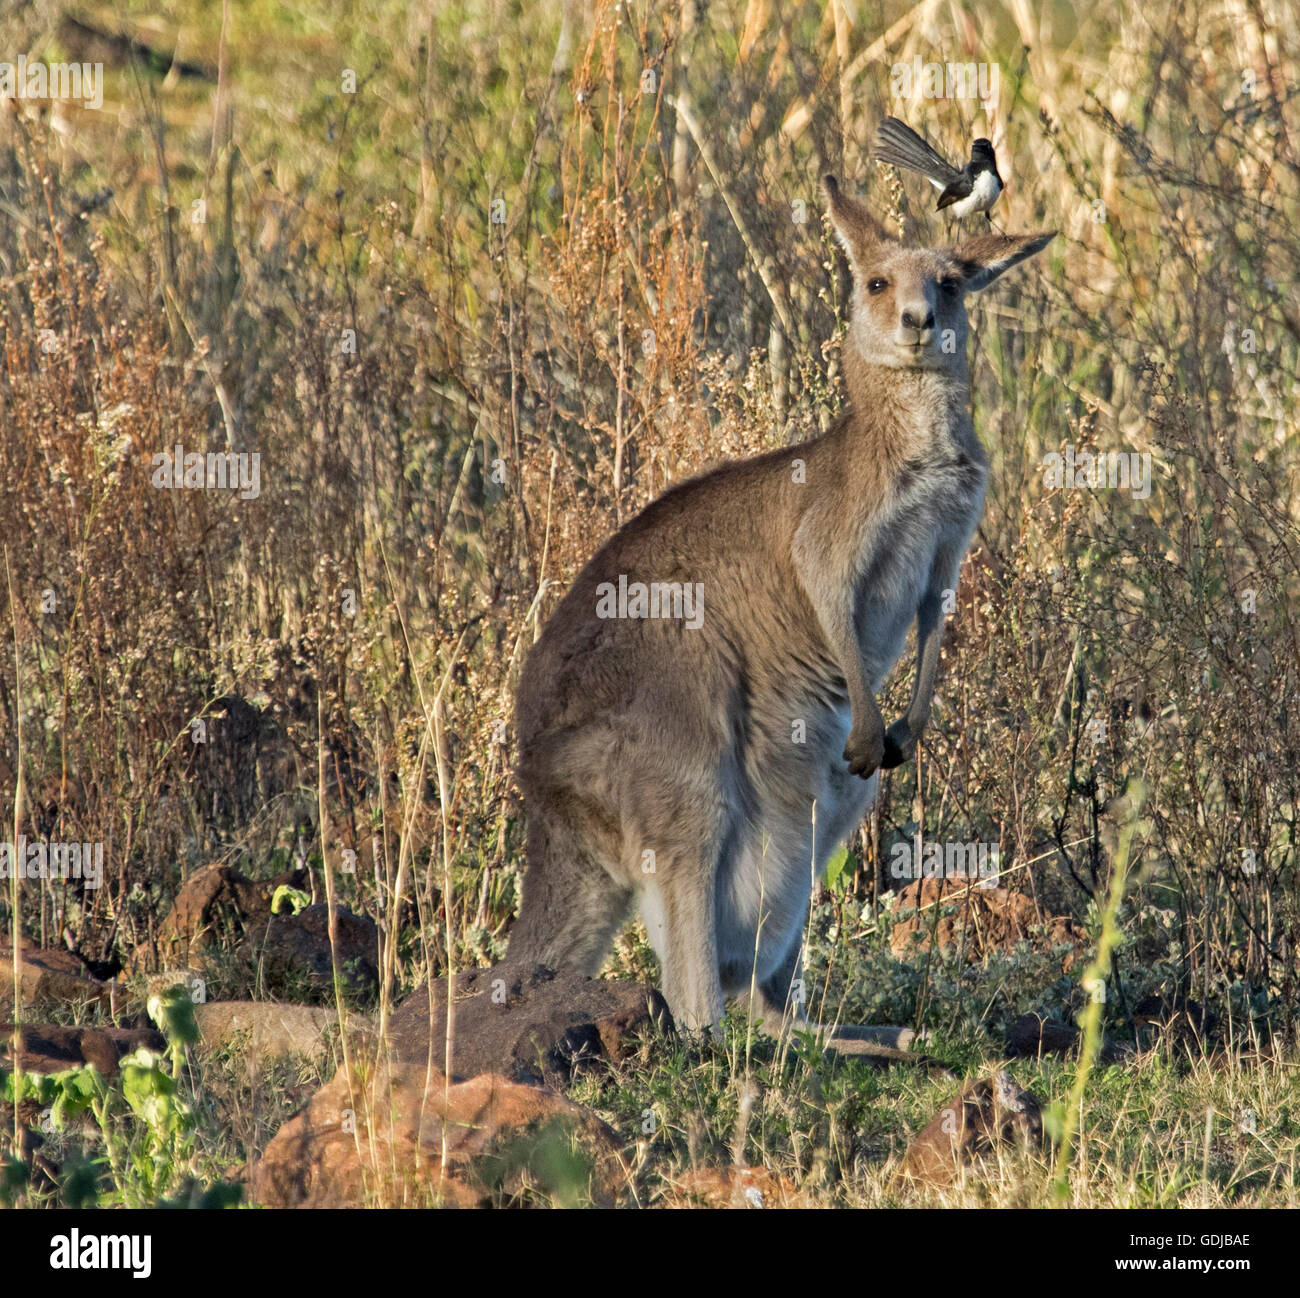 Unusual companions, eastern grey kangaroo Macropus giganteus  in the wild with willy wagtail on ear feeding on insects from among dense fur Stock Photo